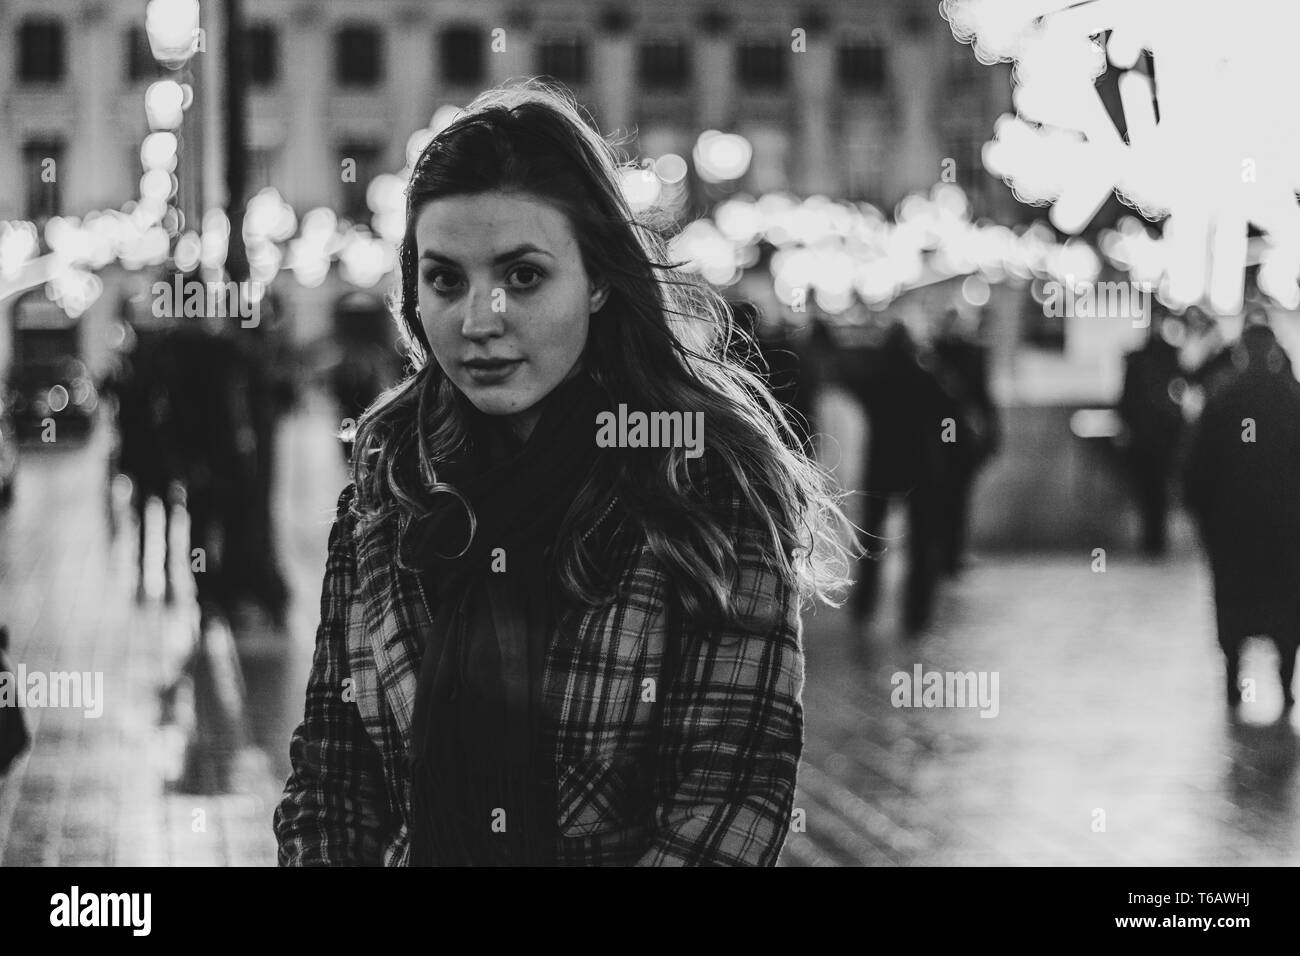 Portrait of a Girl in Paris, France Stock Photo